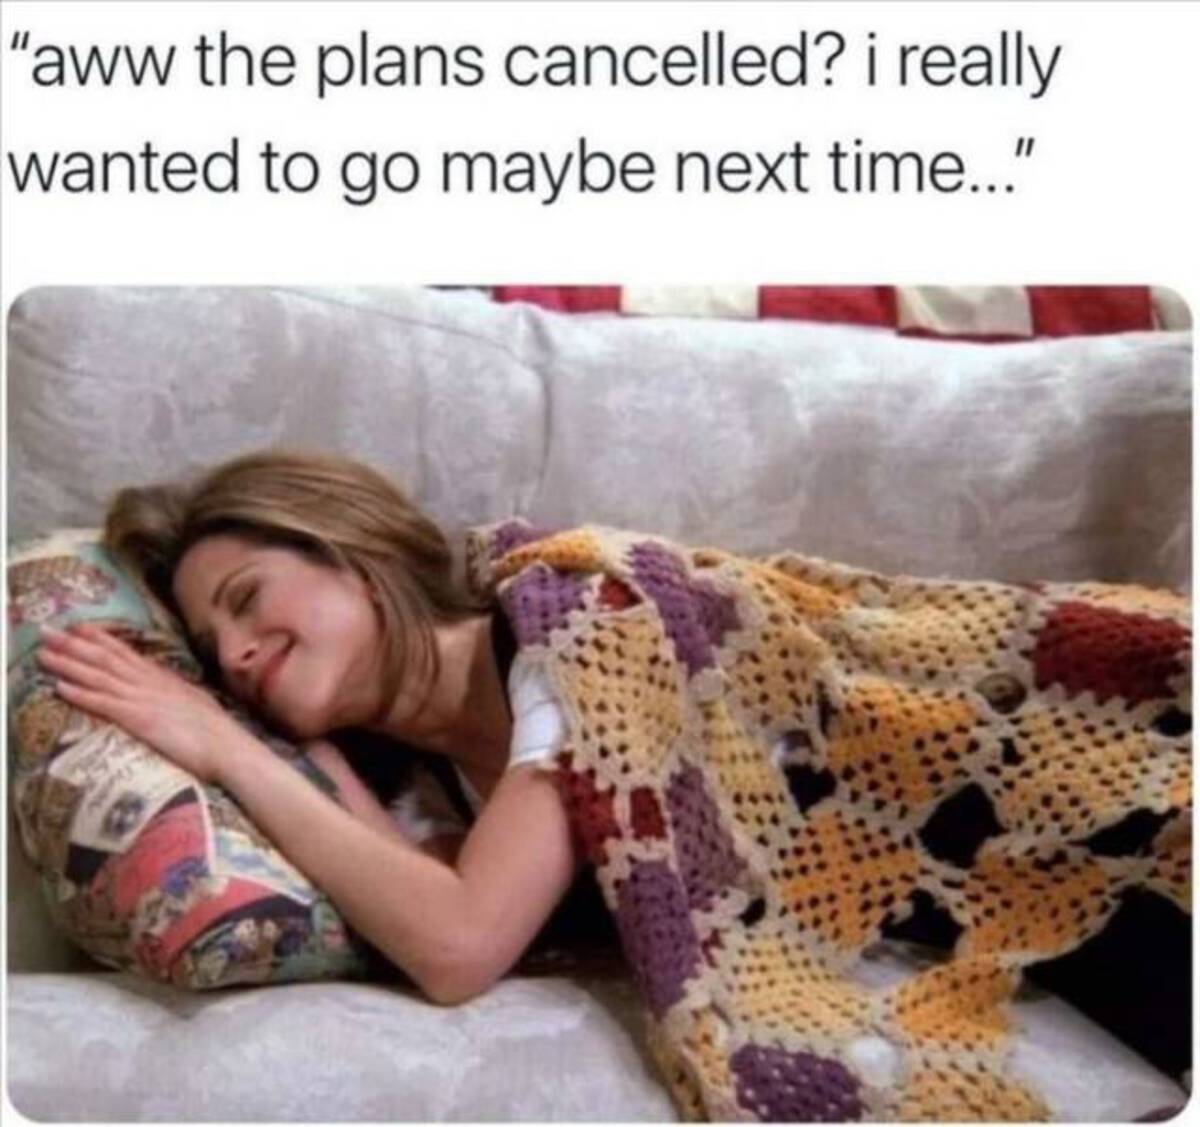 canceled plans meme - "aww the plans cancelled? i really wanted to go maybe next time..."